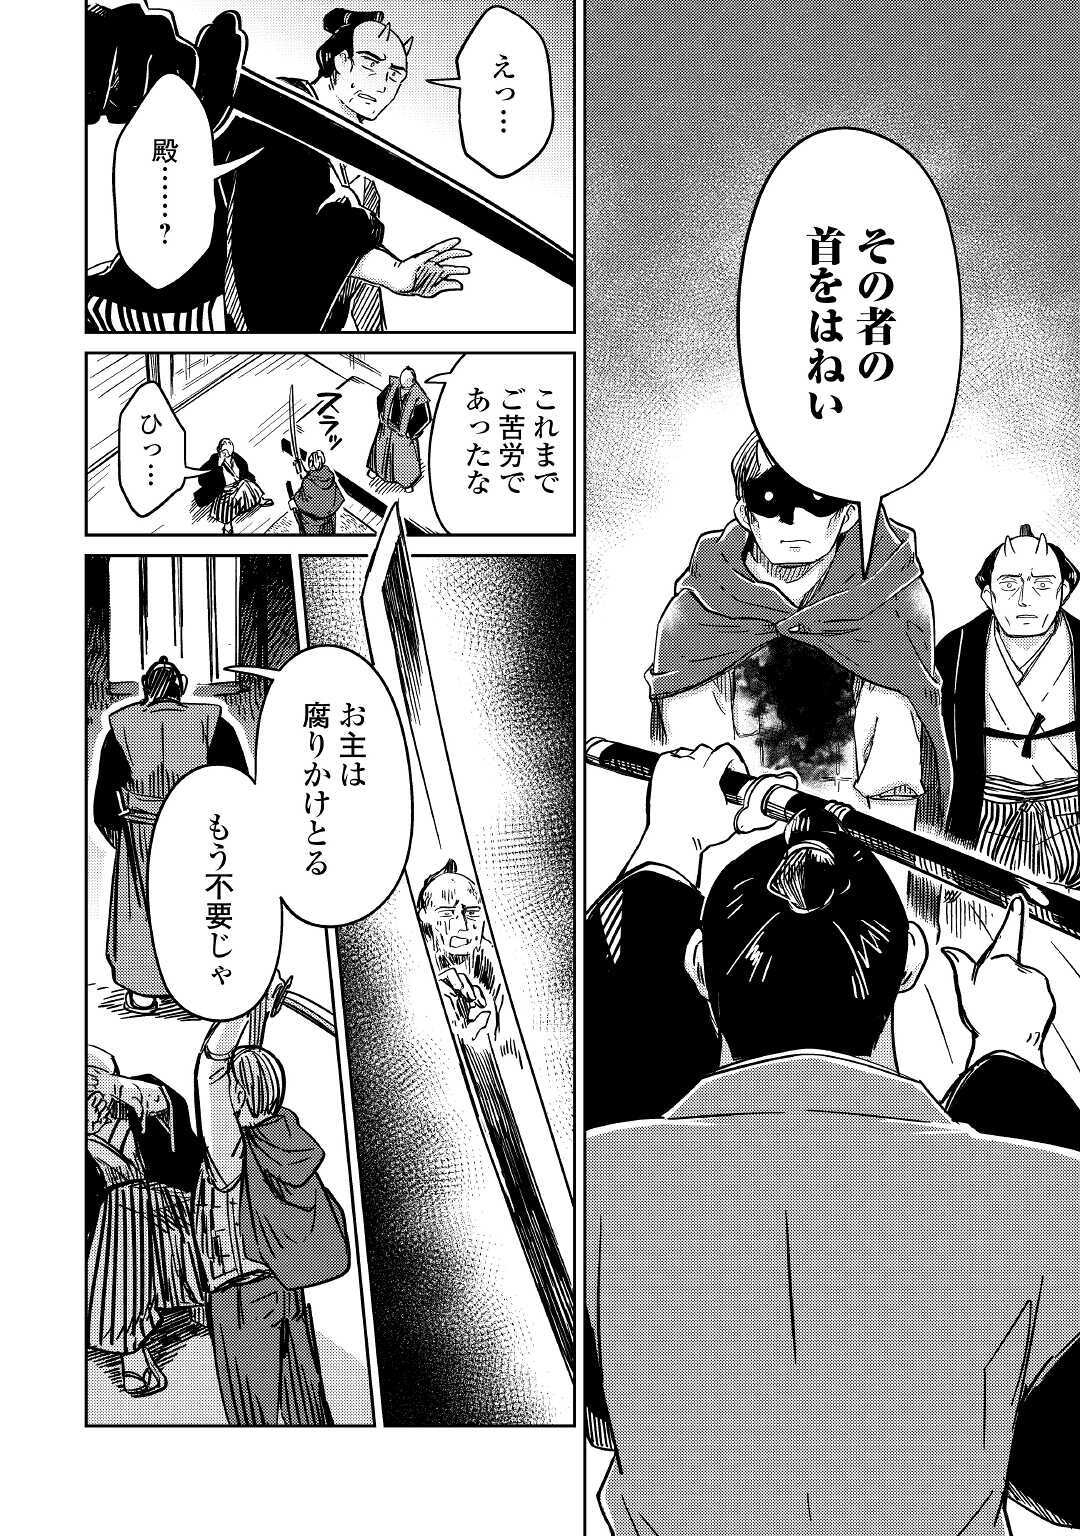 The Former Structural Researcher’s Story of Otherworldly Adventure 第30話 - Page 14